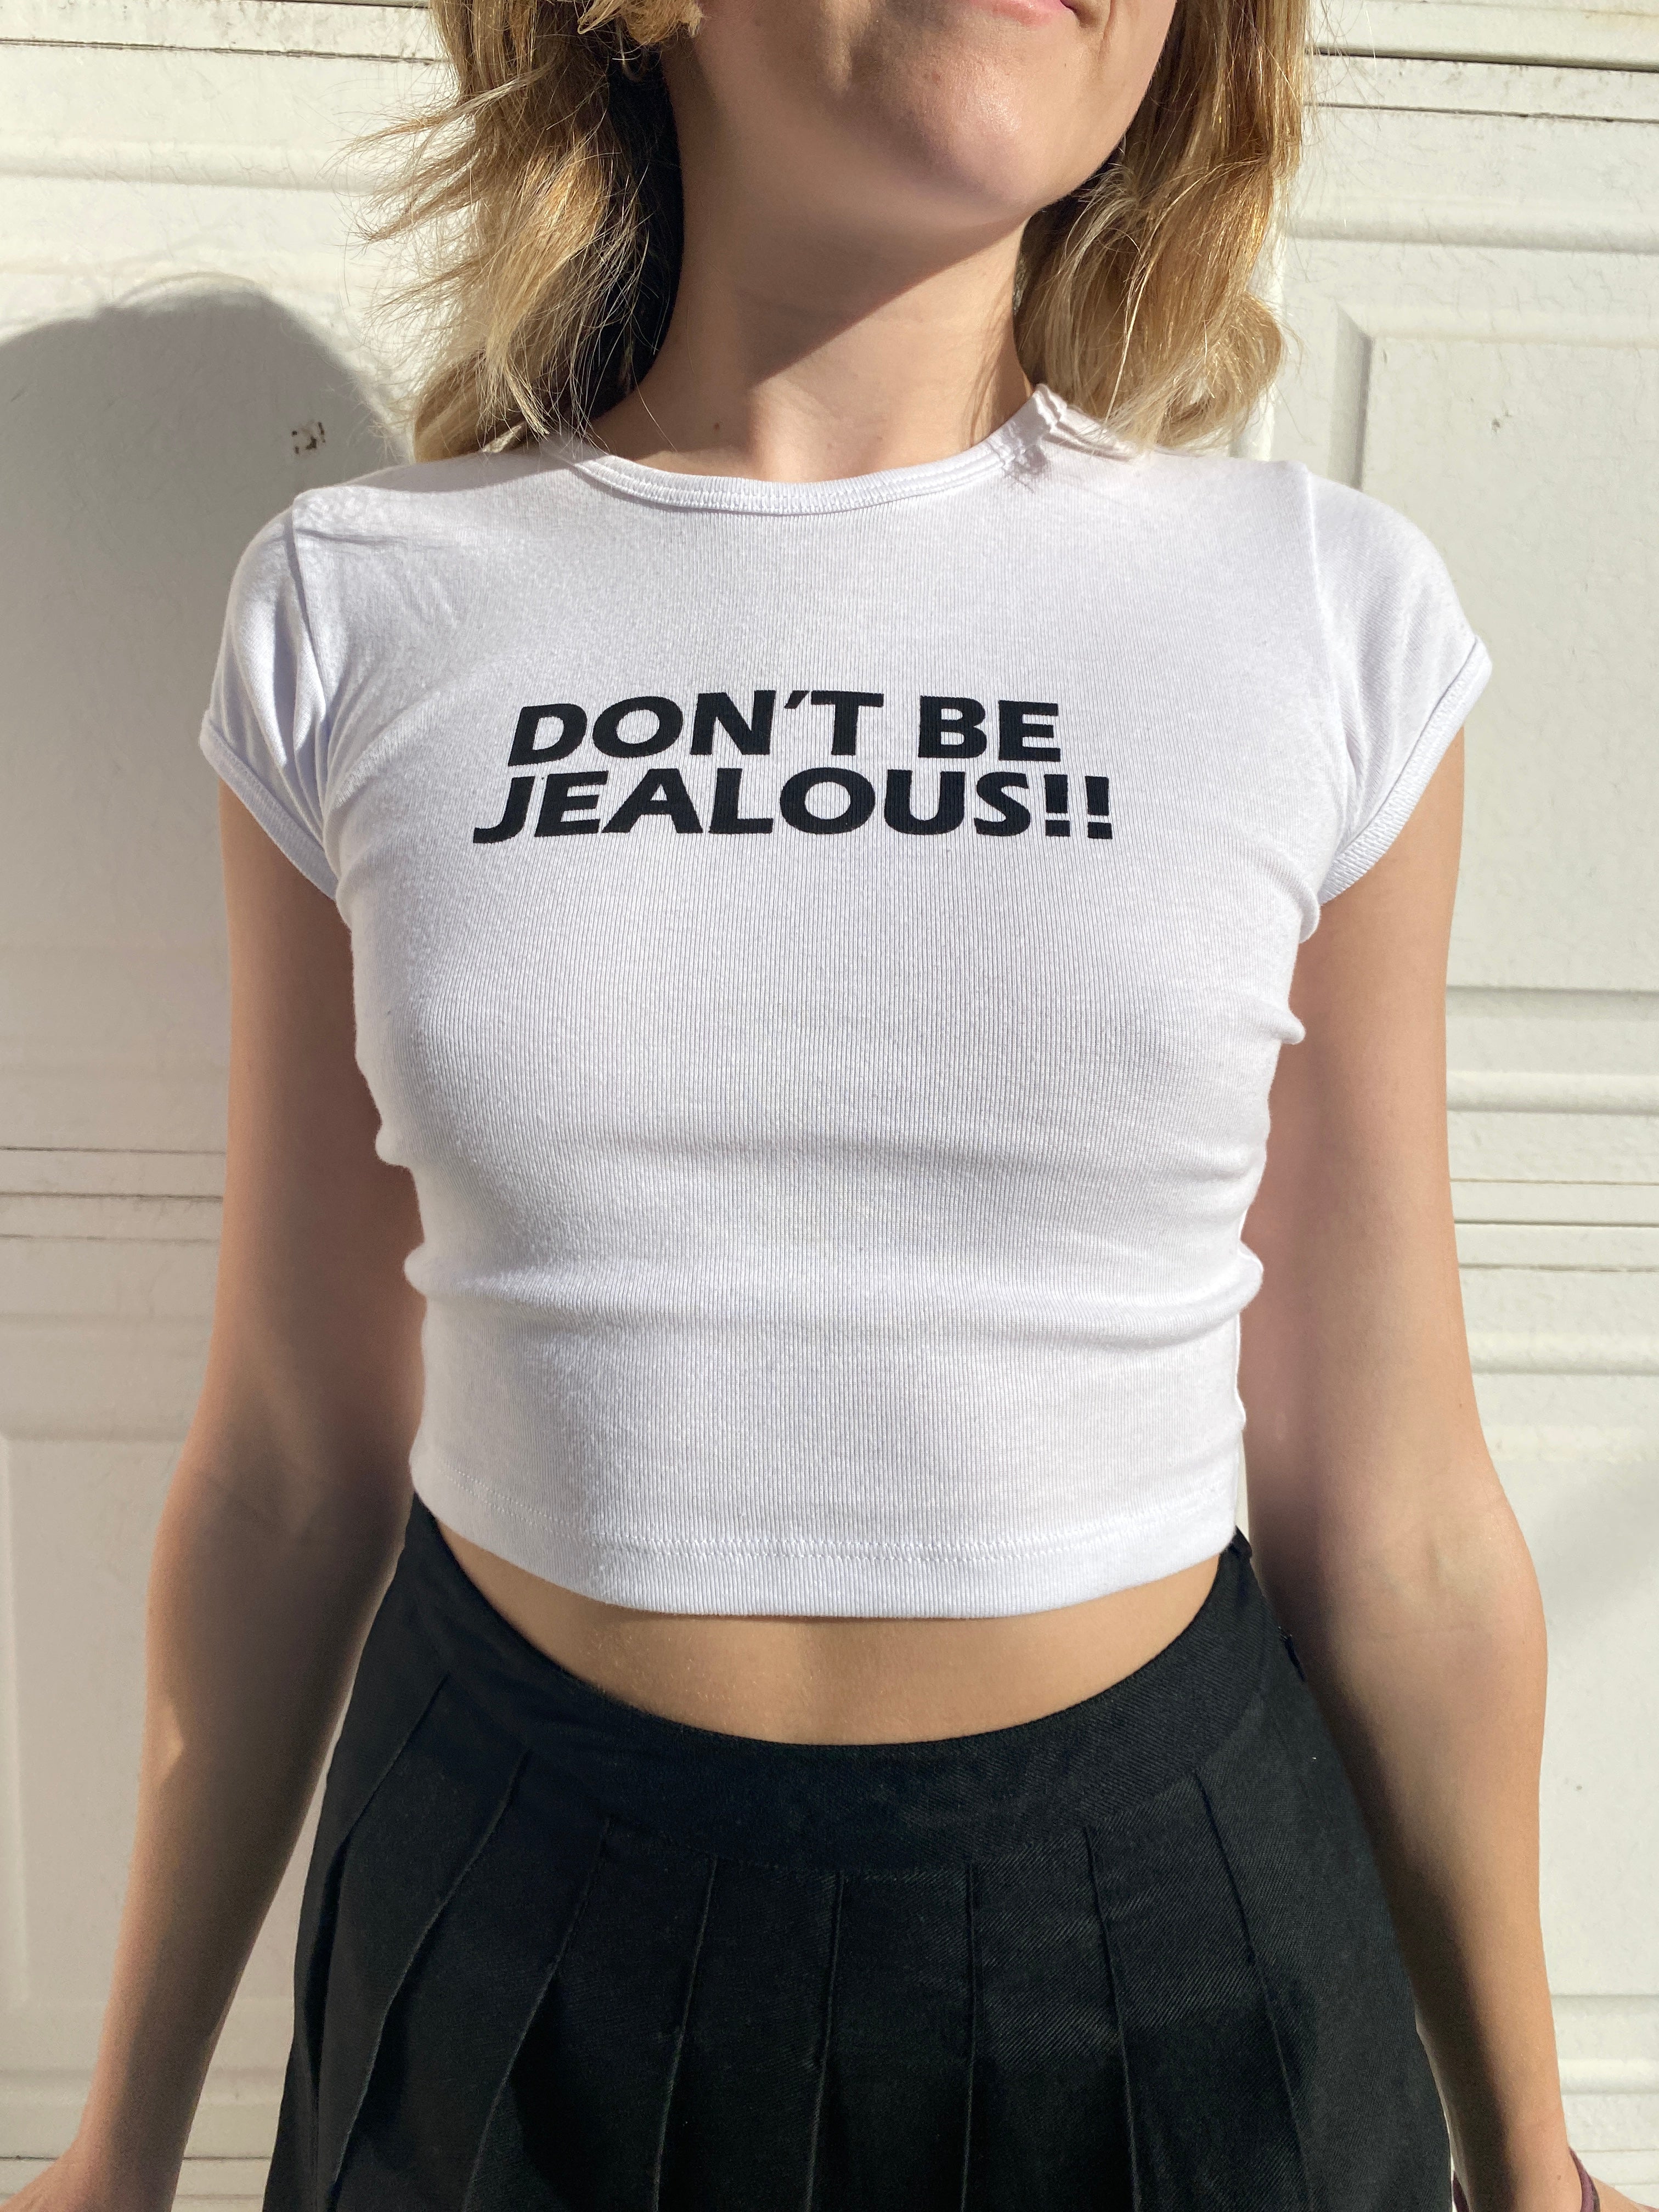 DON'T BE JEALOUS Baby Tee